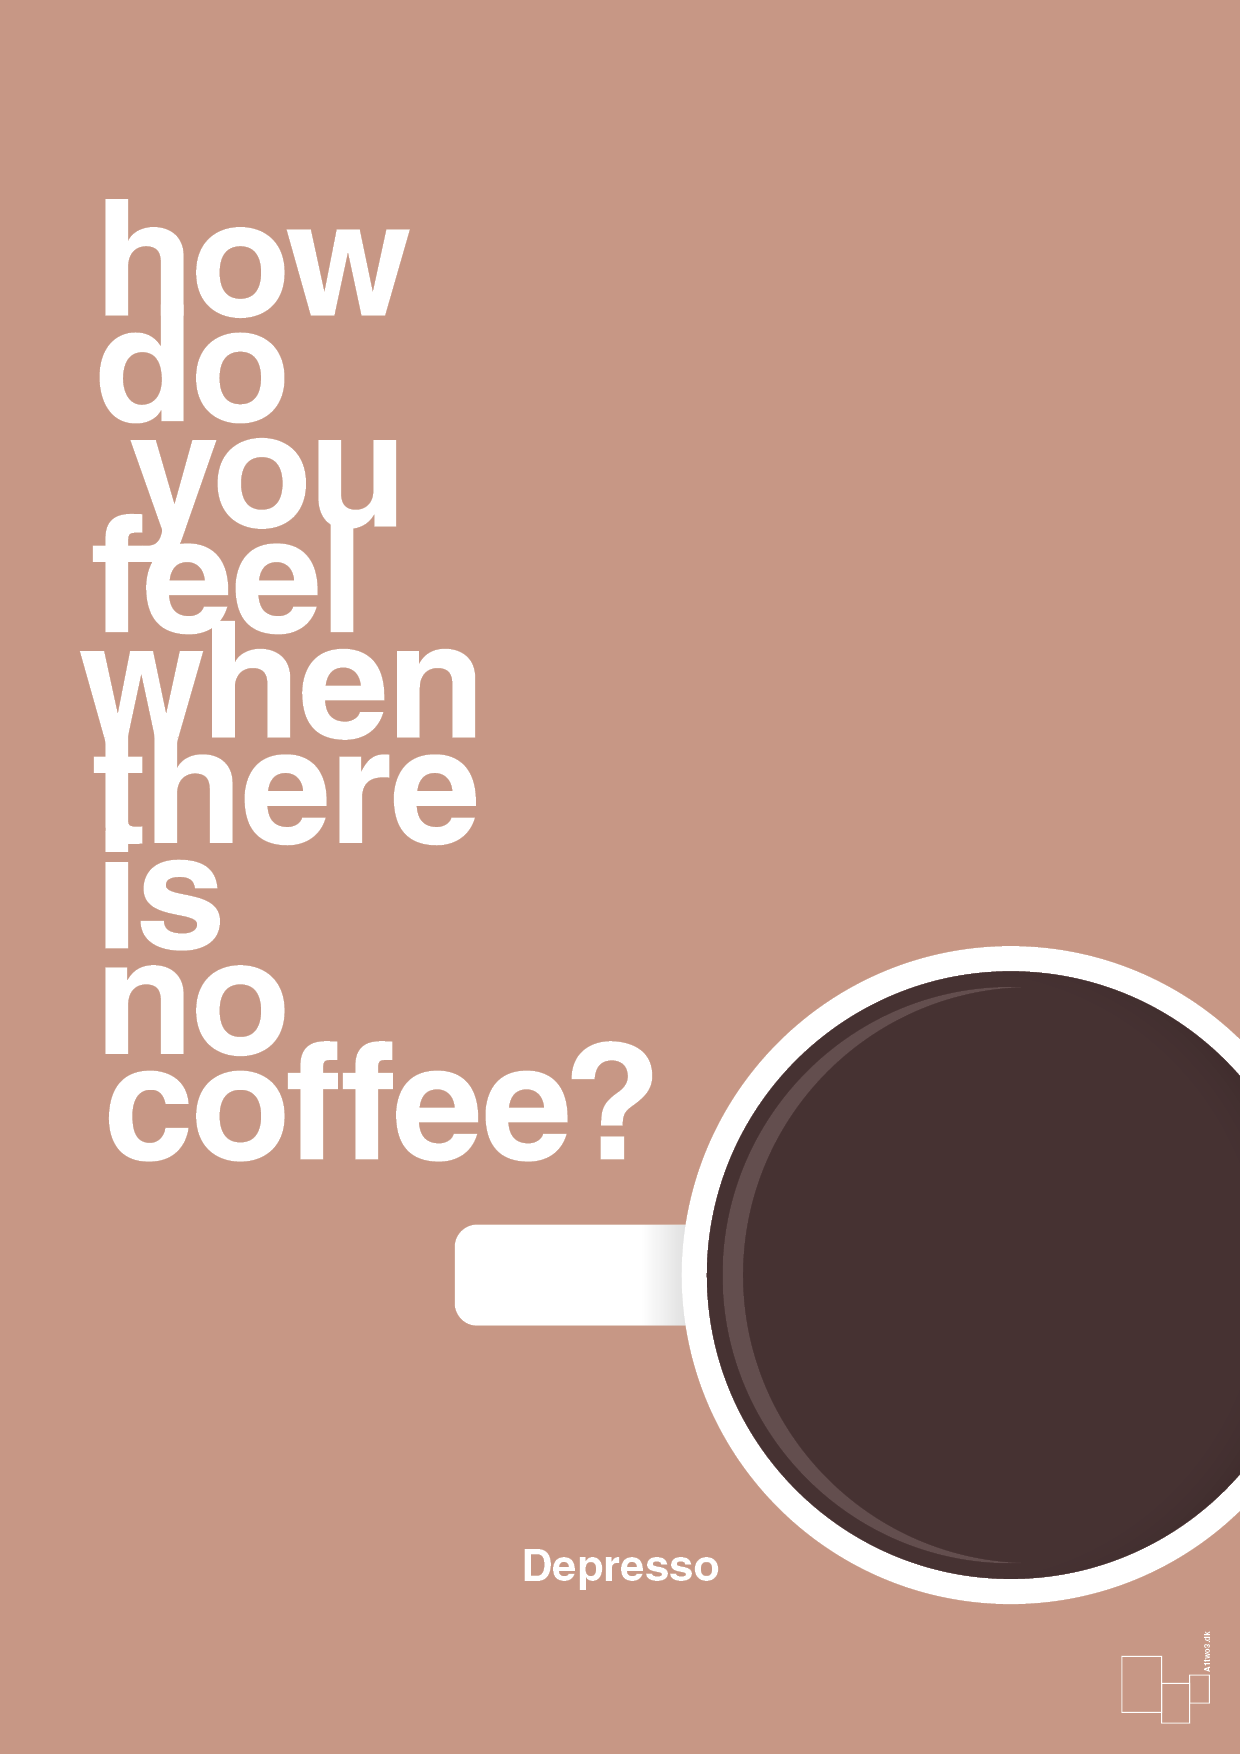 how do you feel when there is no coffee? depresso - Plakat med Mad & Drikke i Powder